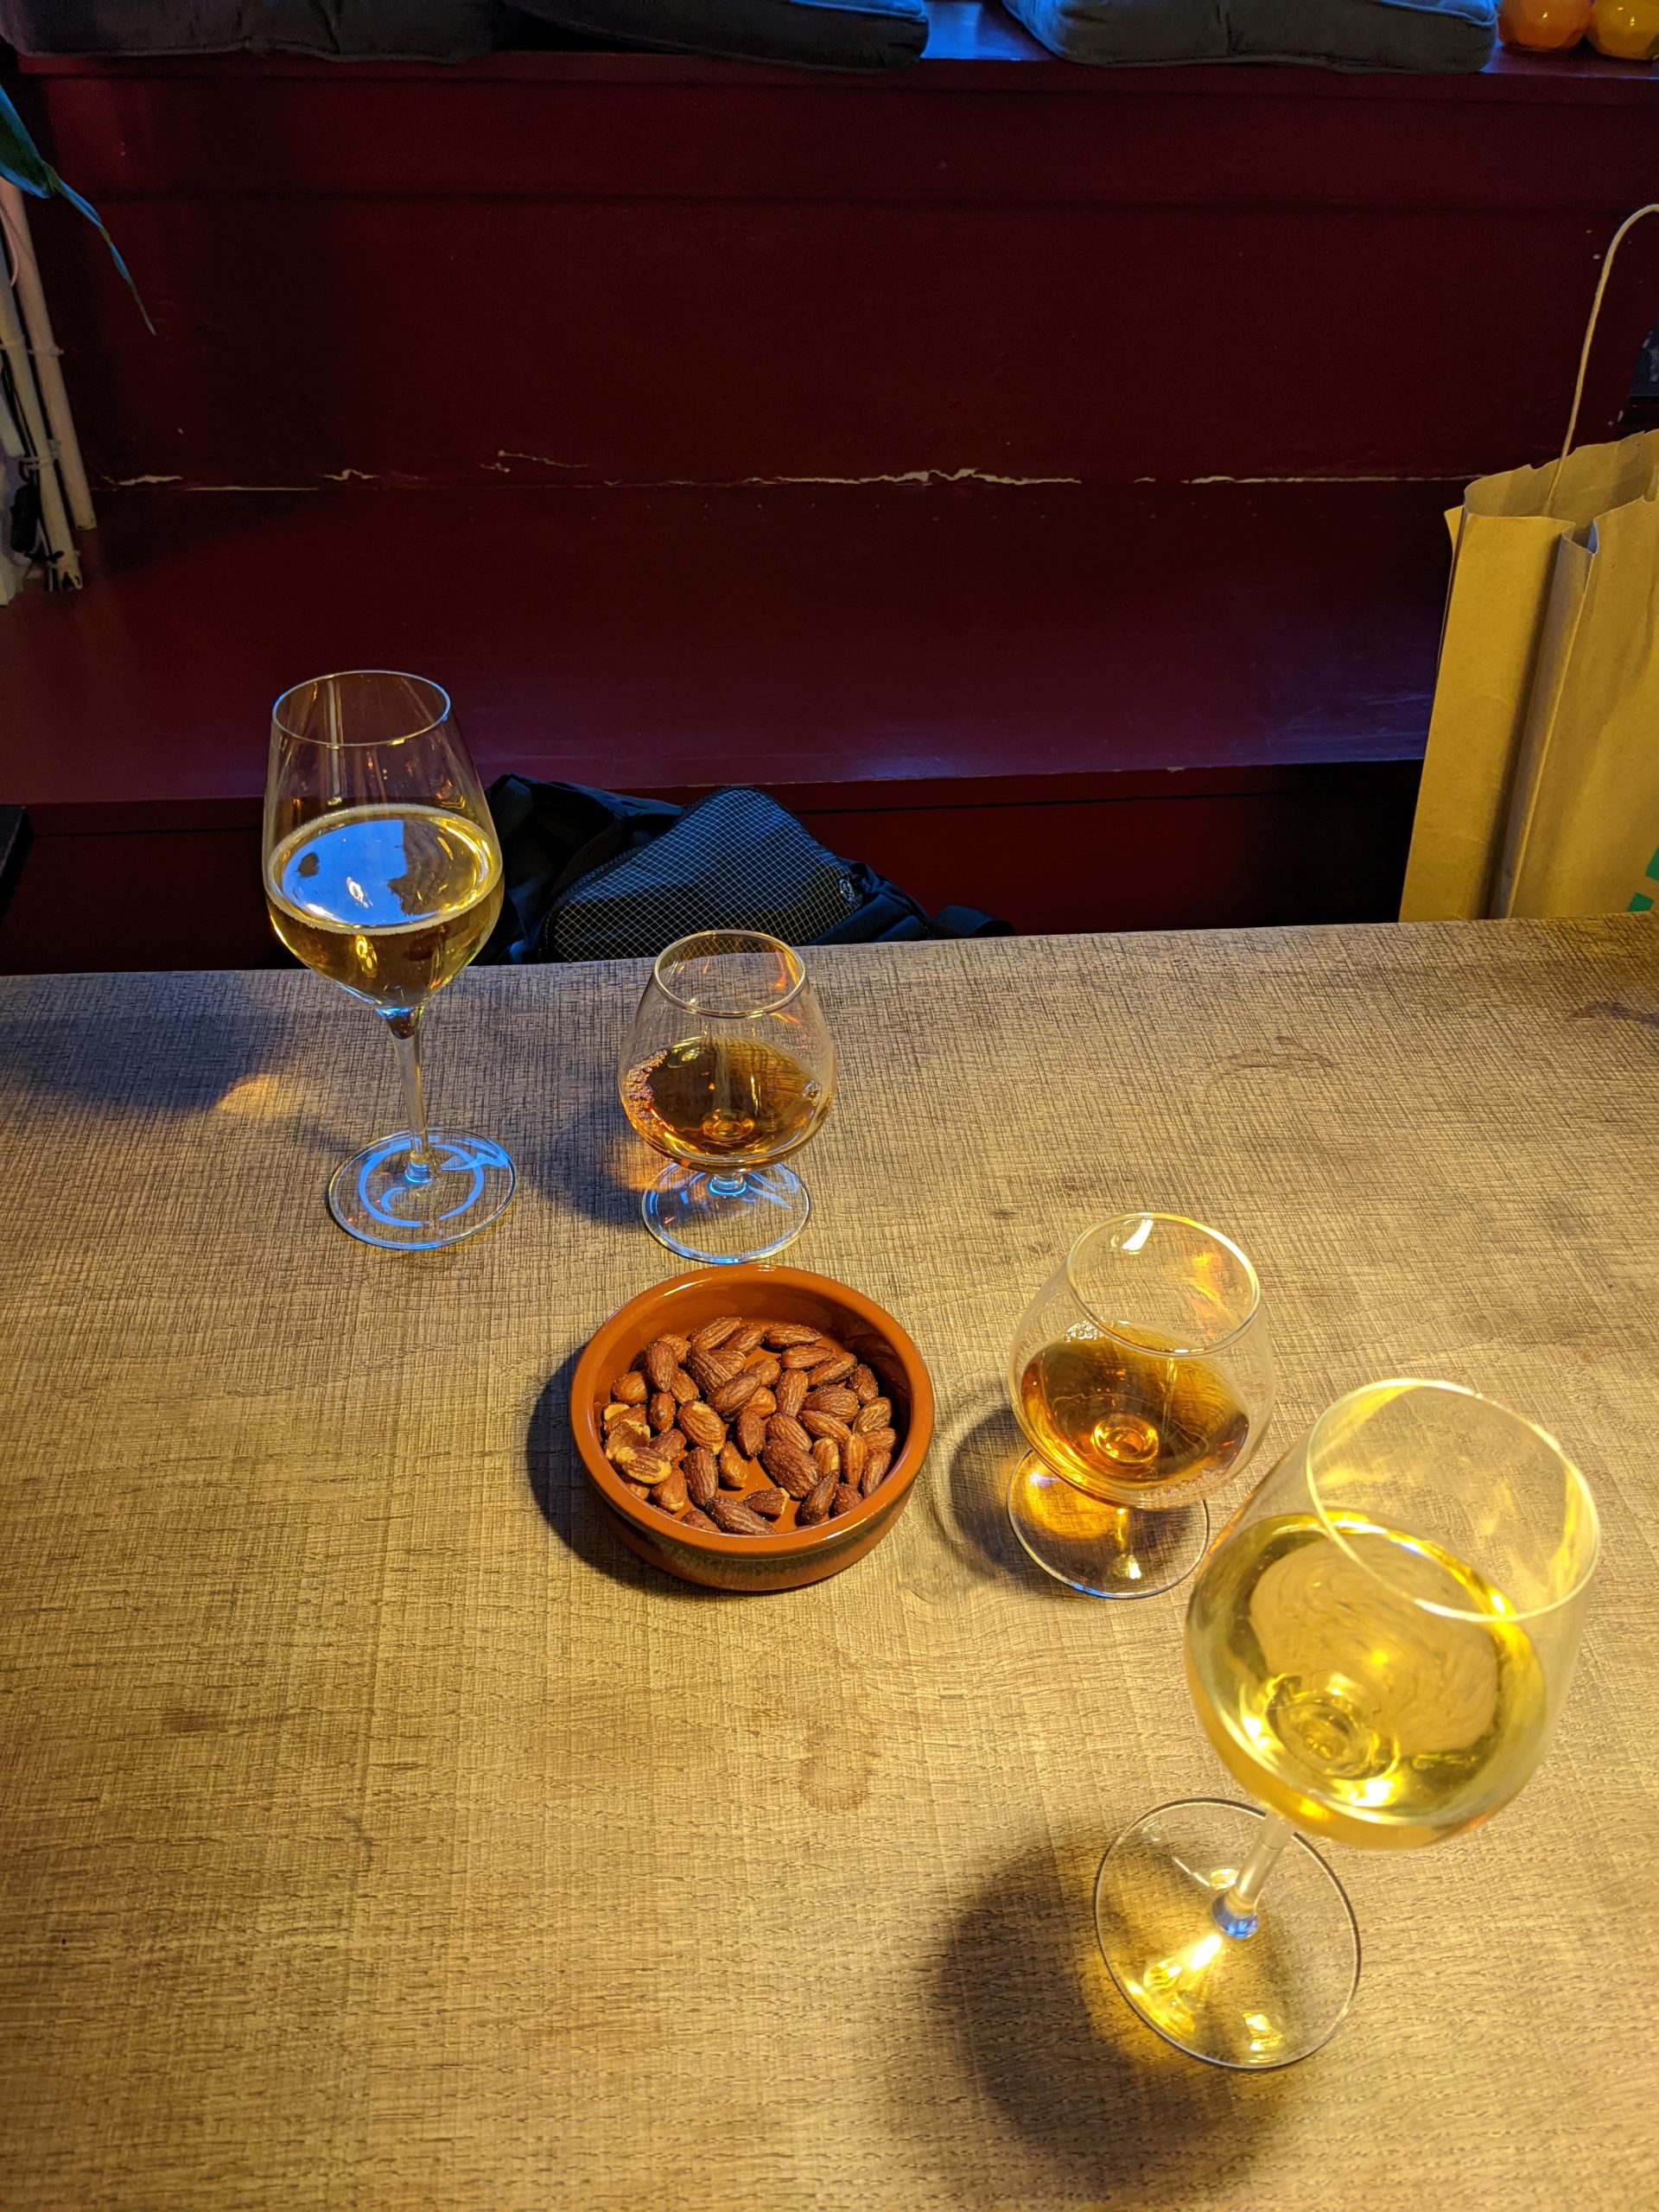 Two glasses of cider in wine glasses with two smaller glasses of alcohol and a plate of peanuts sits in between the glasses on a table